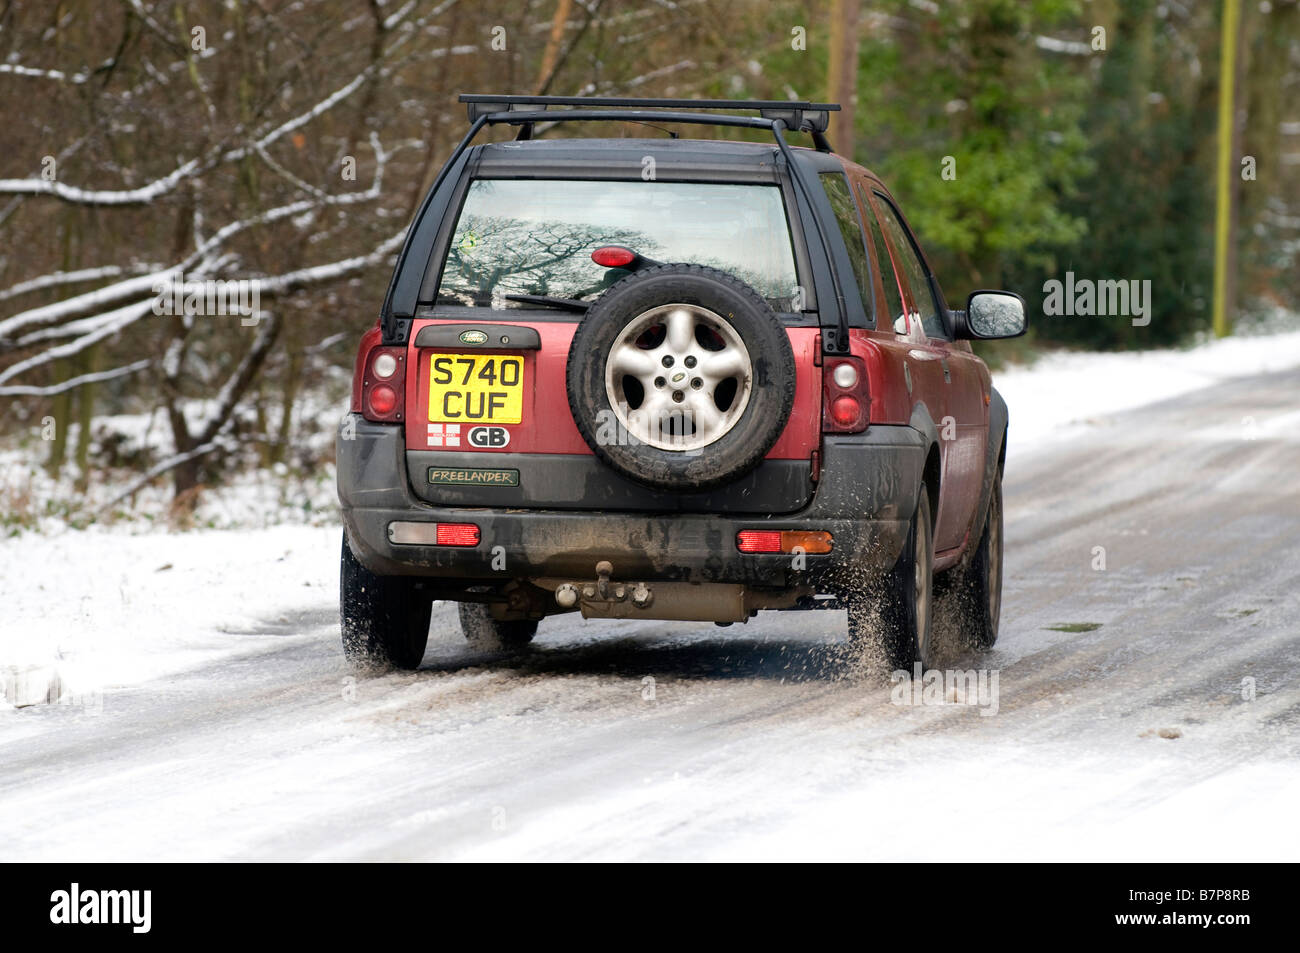 1998 Land Rover Freelander driving on snowy road Stock Photo